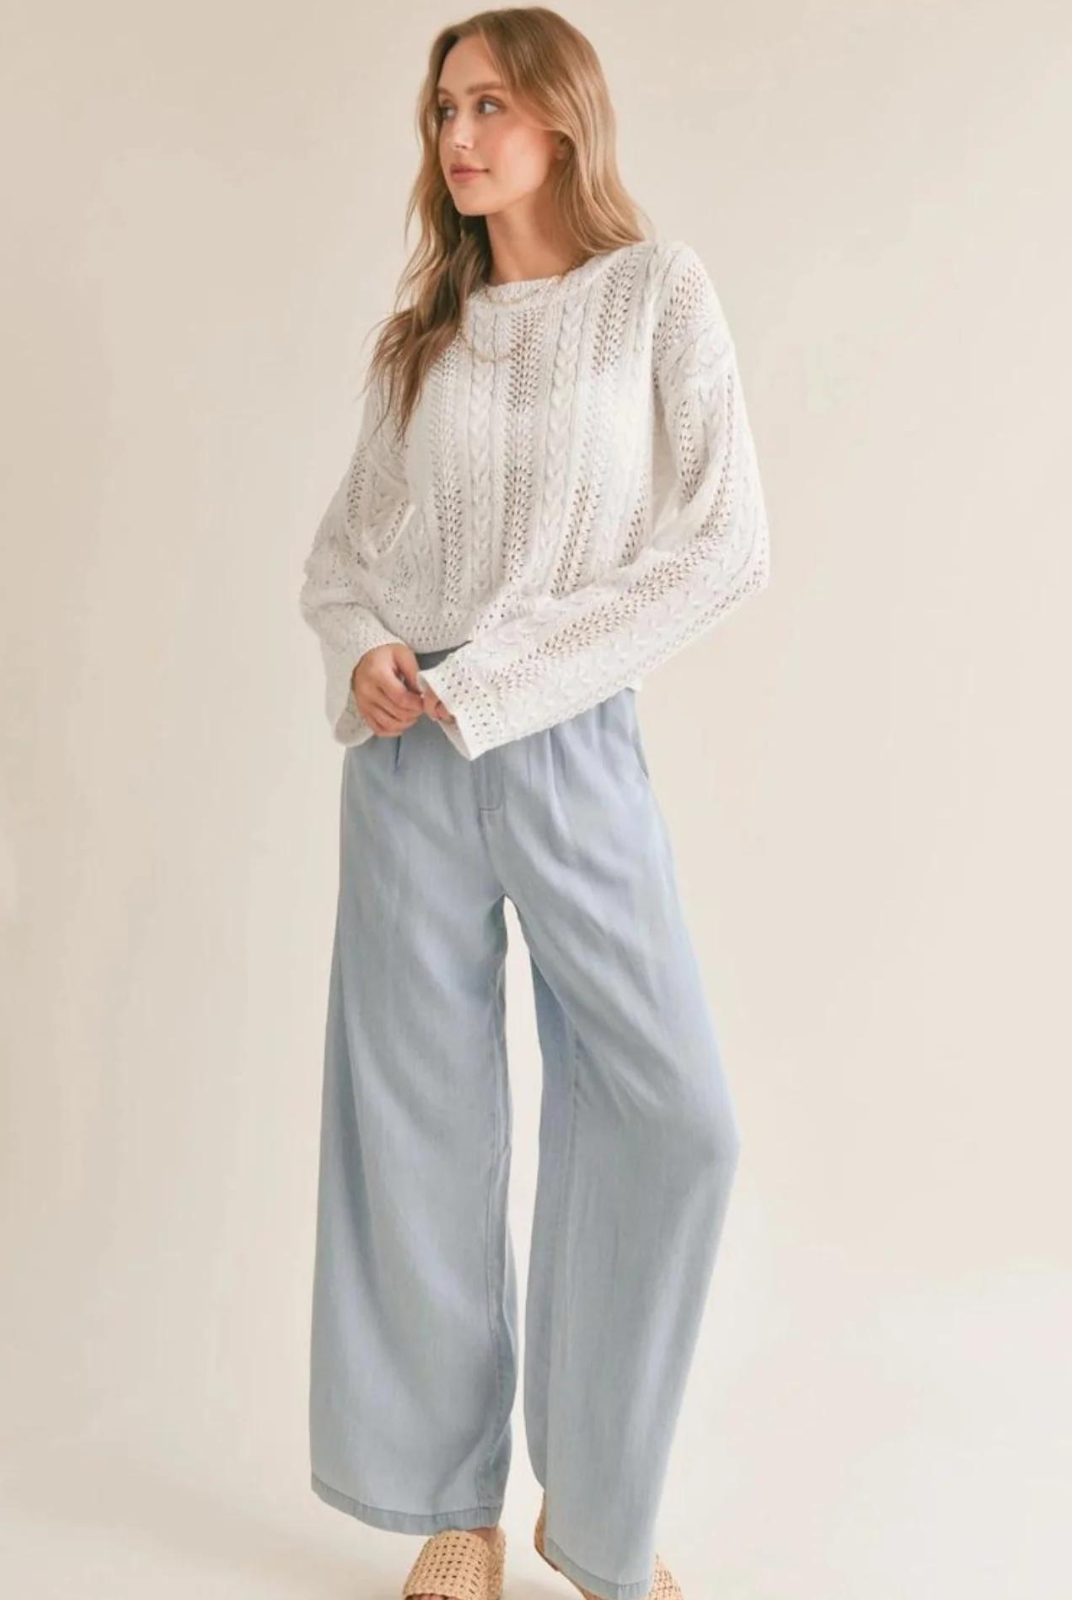 Sadie & Sage Ella Cable Knit Sweater. Elevate your spring wardrobe with our Ella Cable Knit Sweater! Featuring a classic cable knit design and lightweight fabric, this long sleeve sweater in white is perfect for layering and keeping you warm without weighing you down.